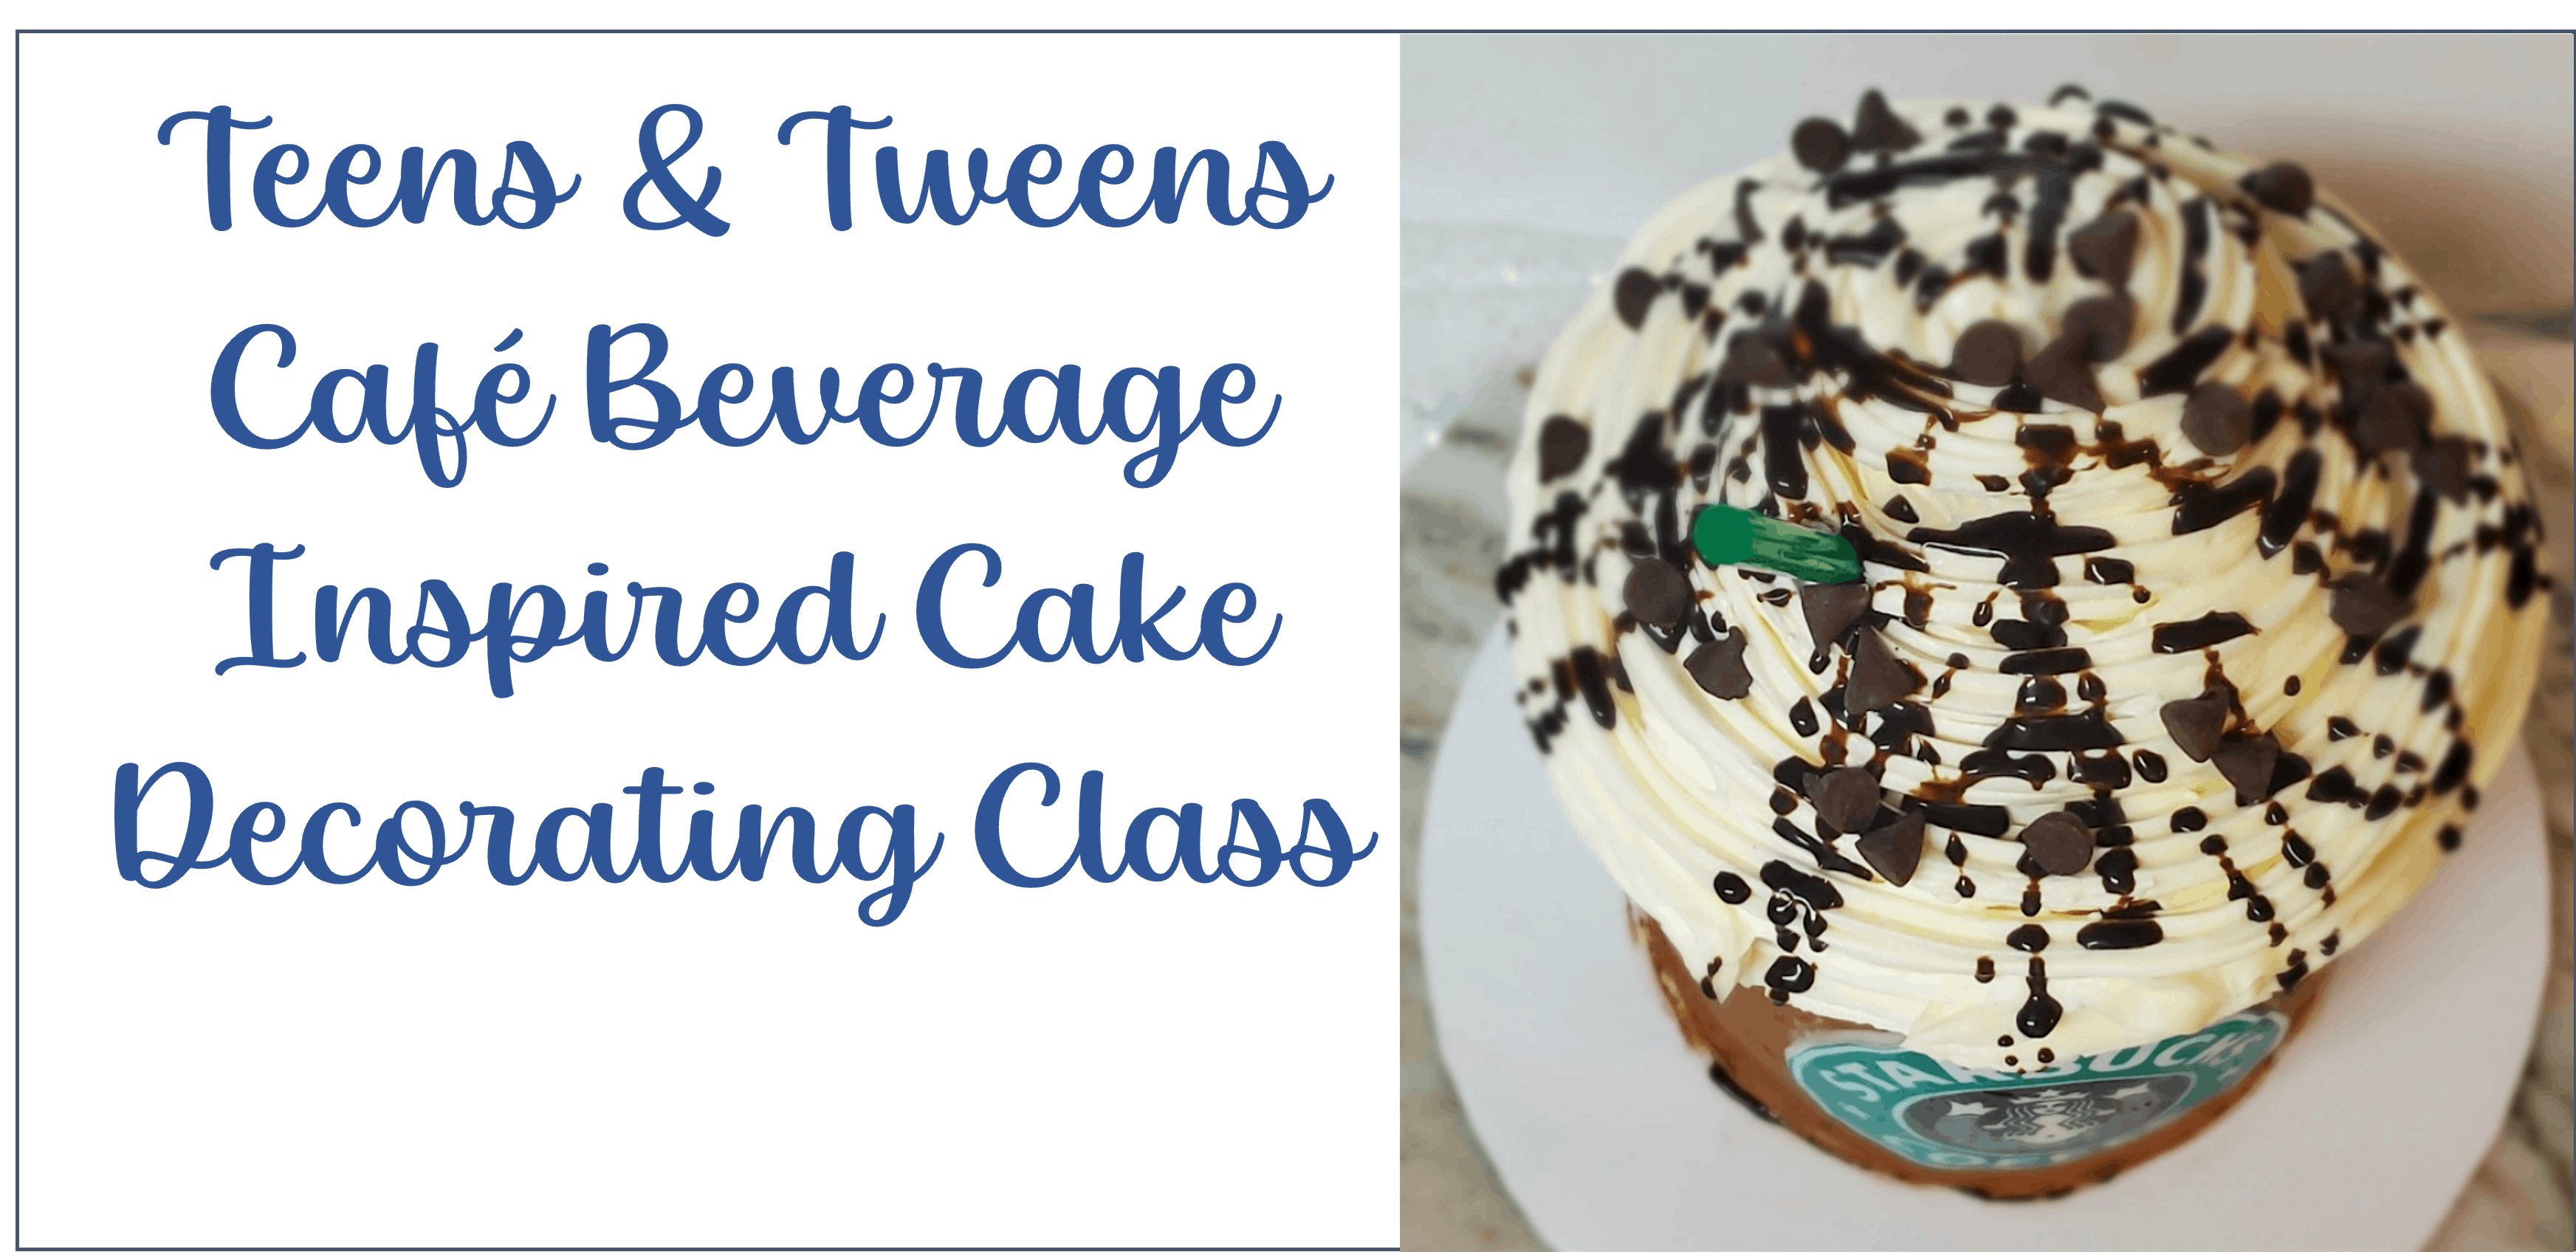 Tweens & Teens Cafe Beverage Inspired Cake Class at Frans Cake & Candy